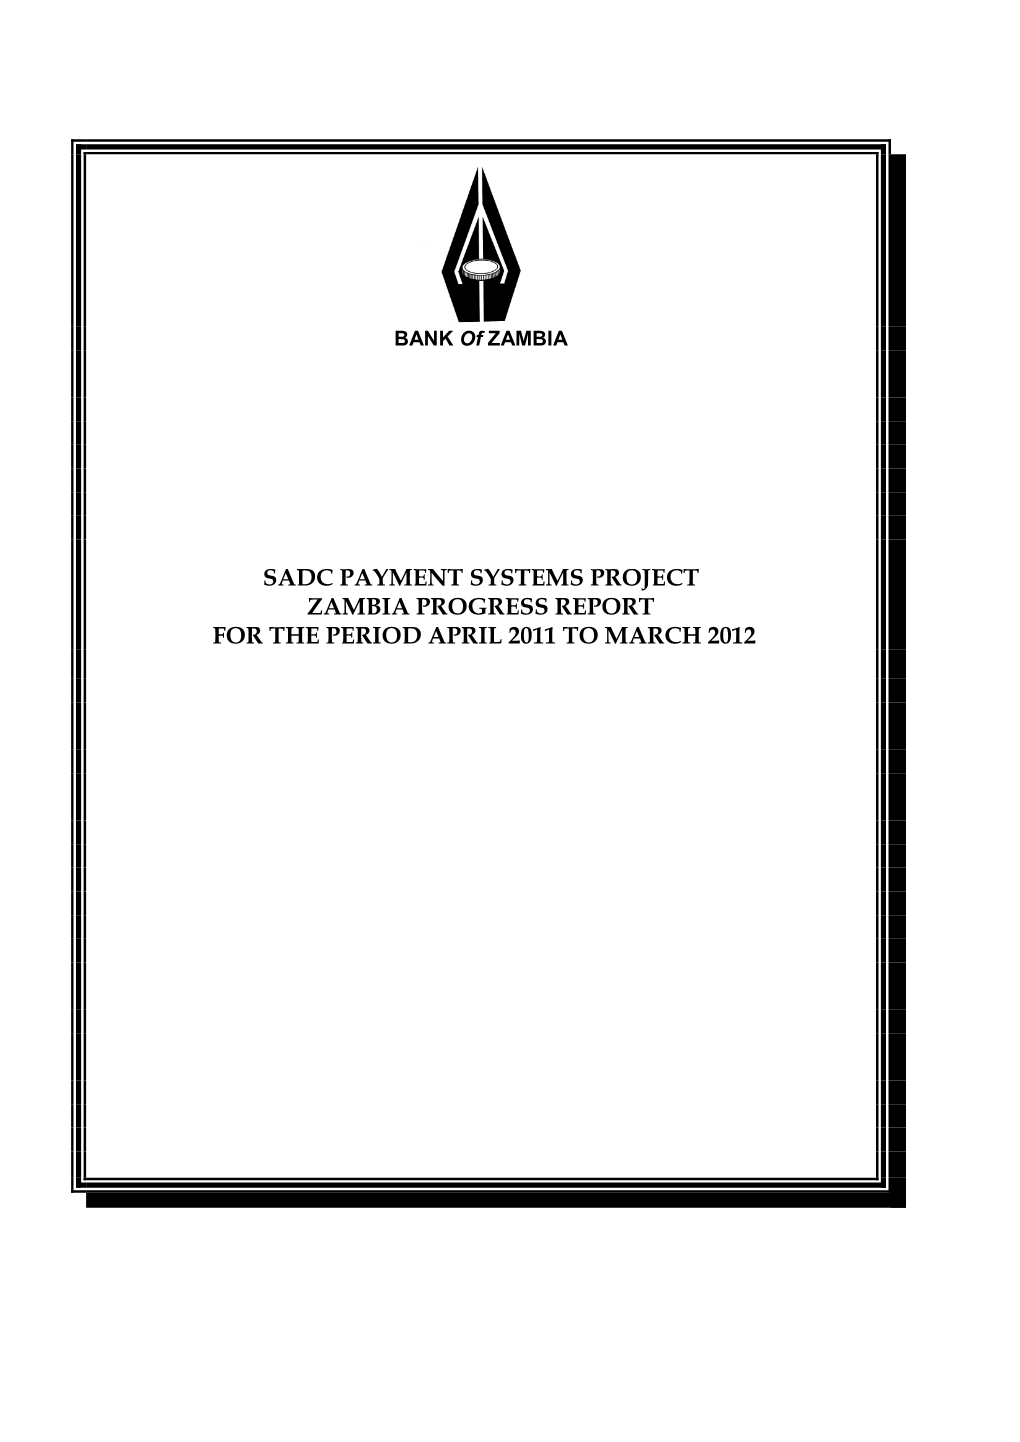 Sadc Payment Systems Project Zambia Progress Report for the Period April 2011 to March 2012